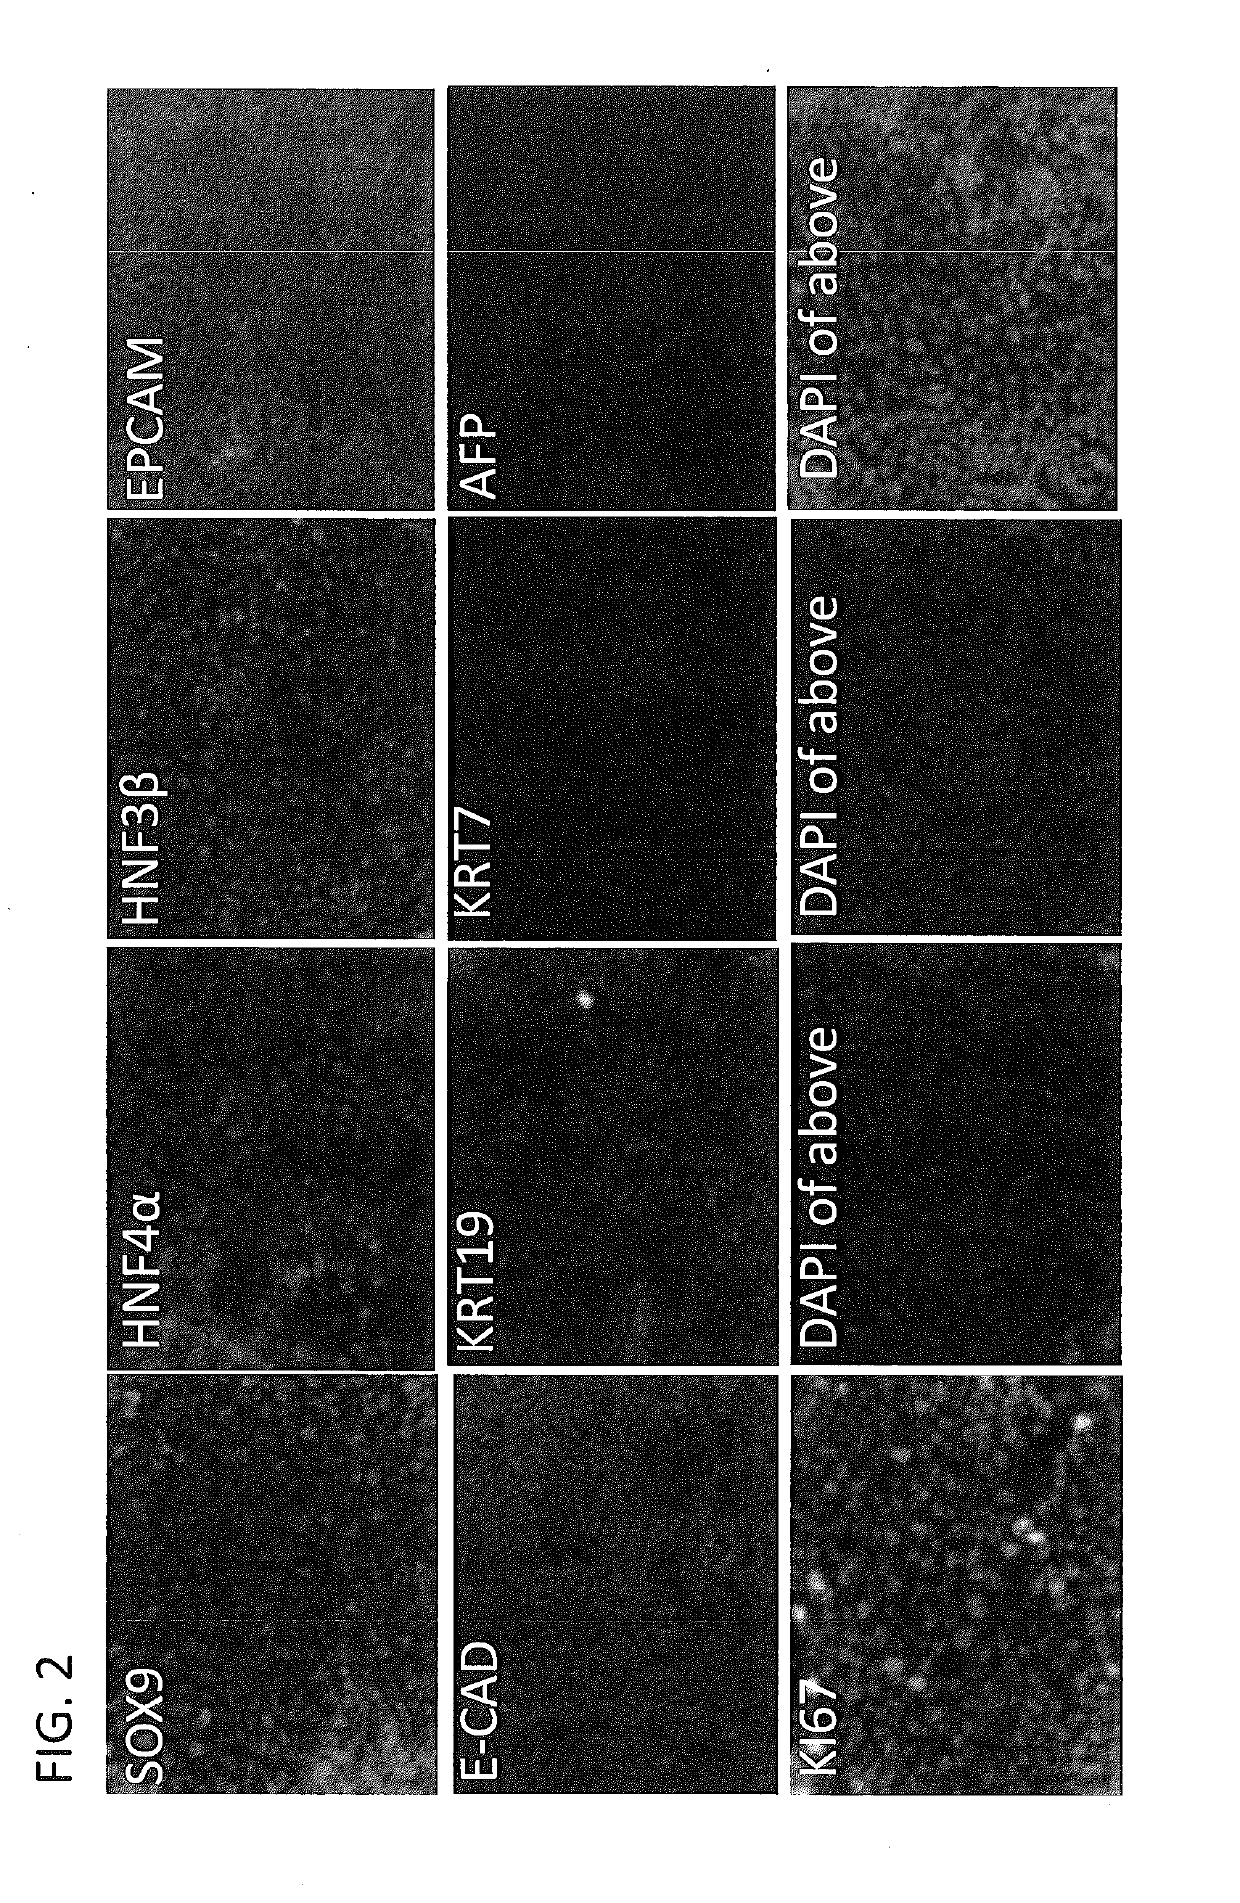 Derivation of hepatic stem cells and mature liver cell types and uses thereof